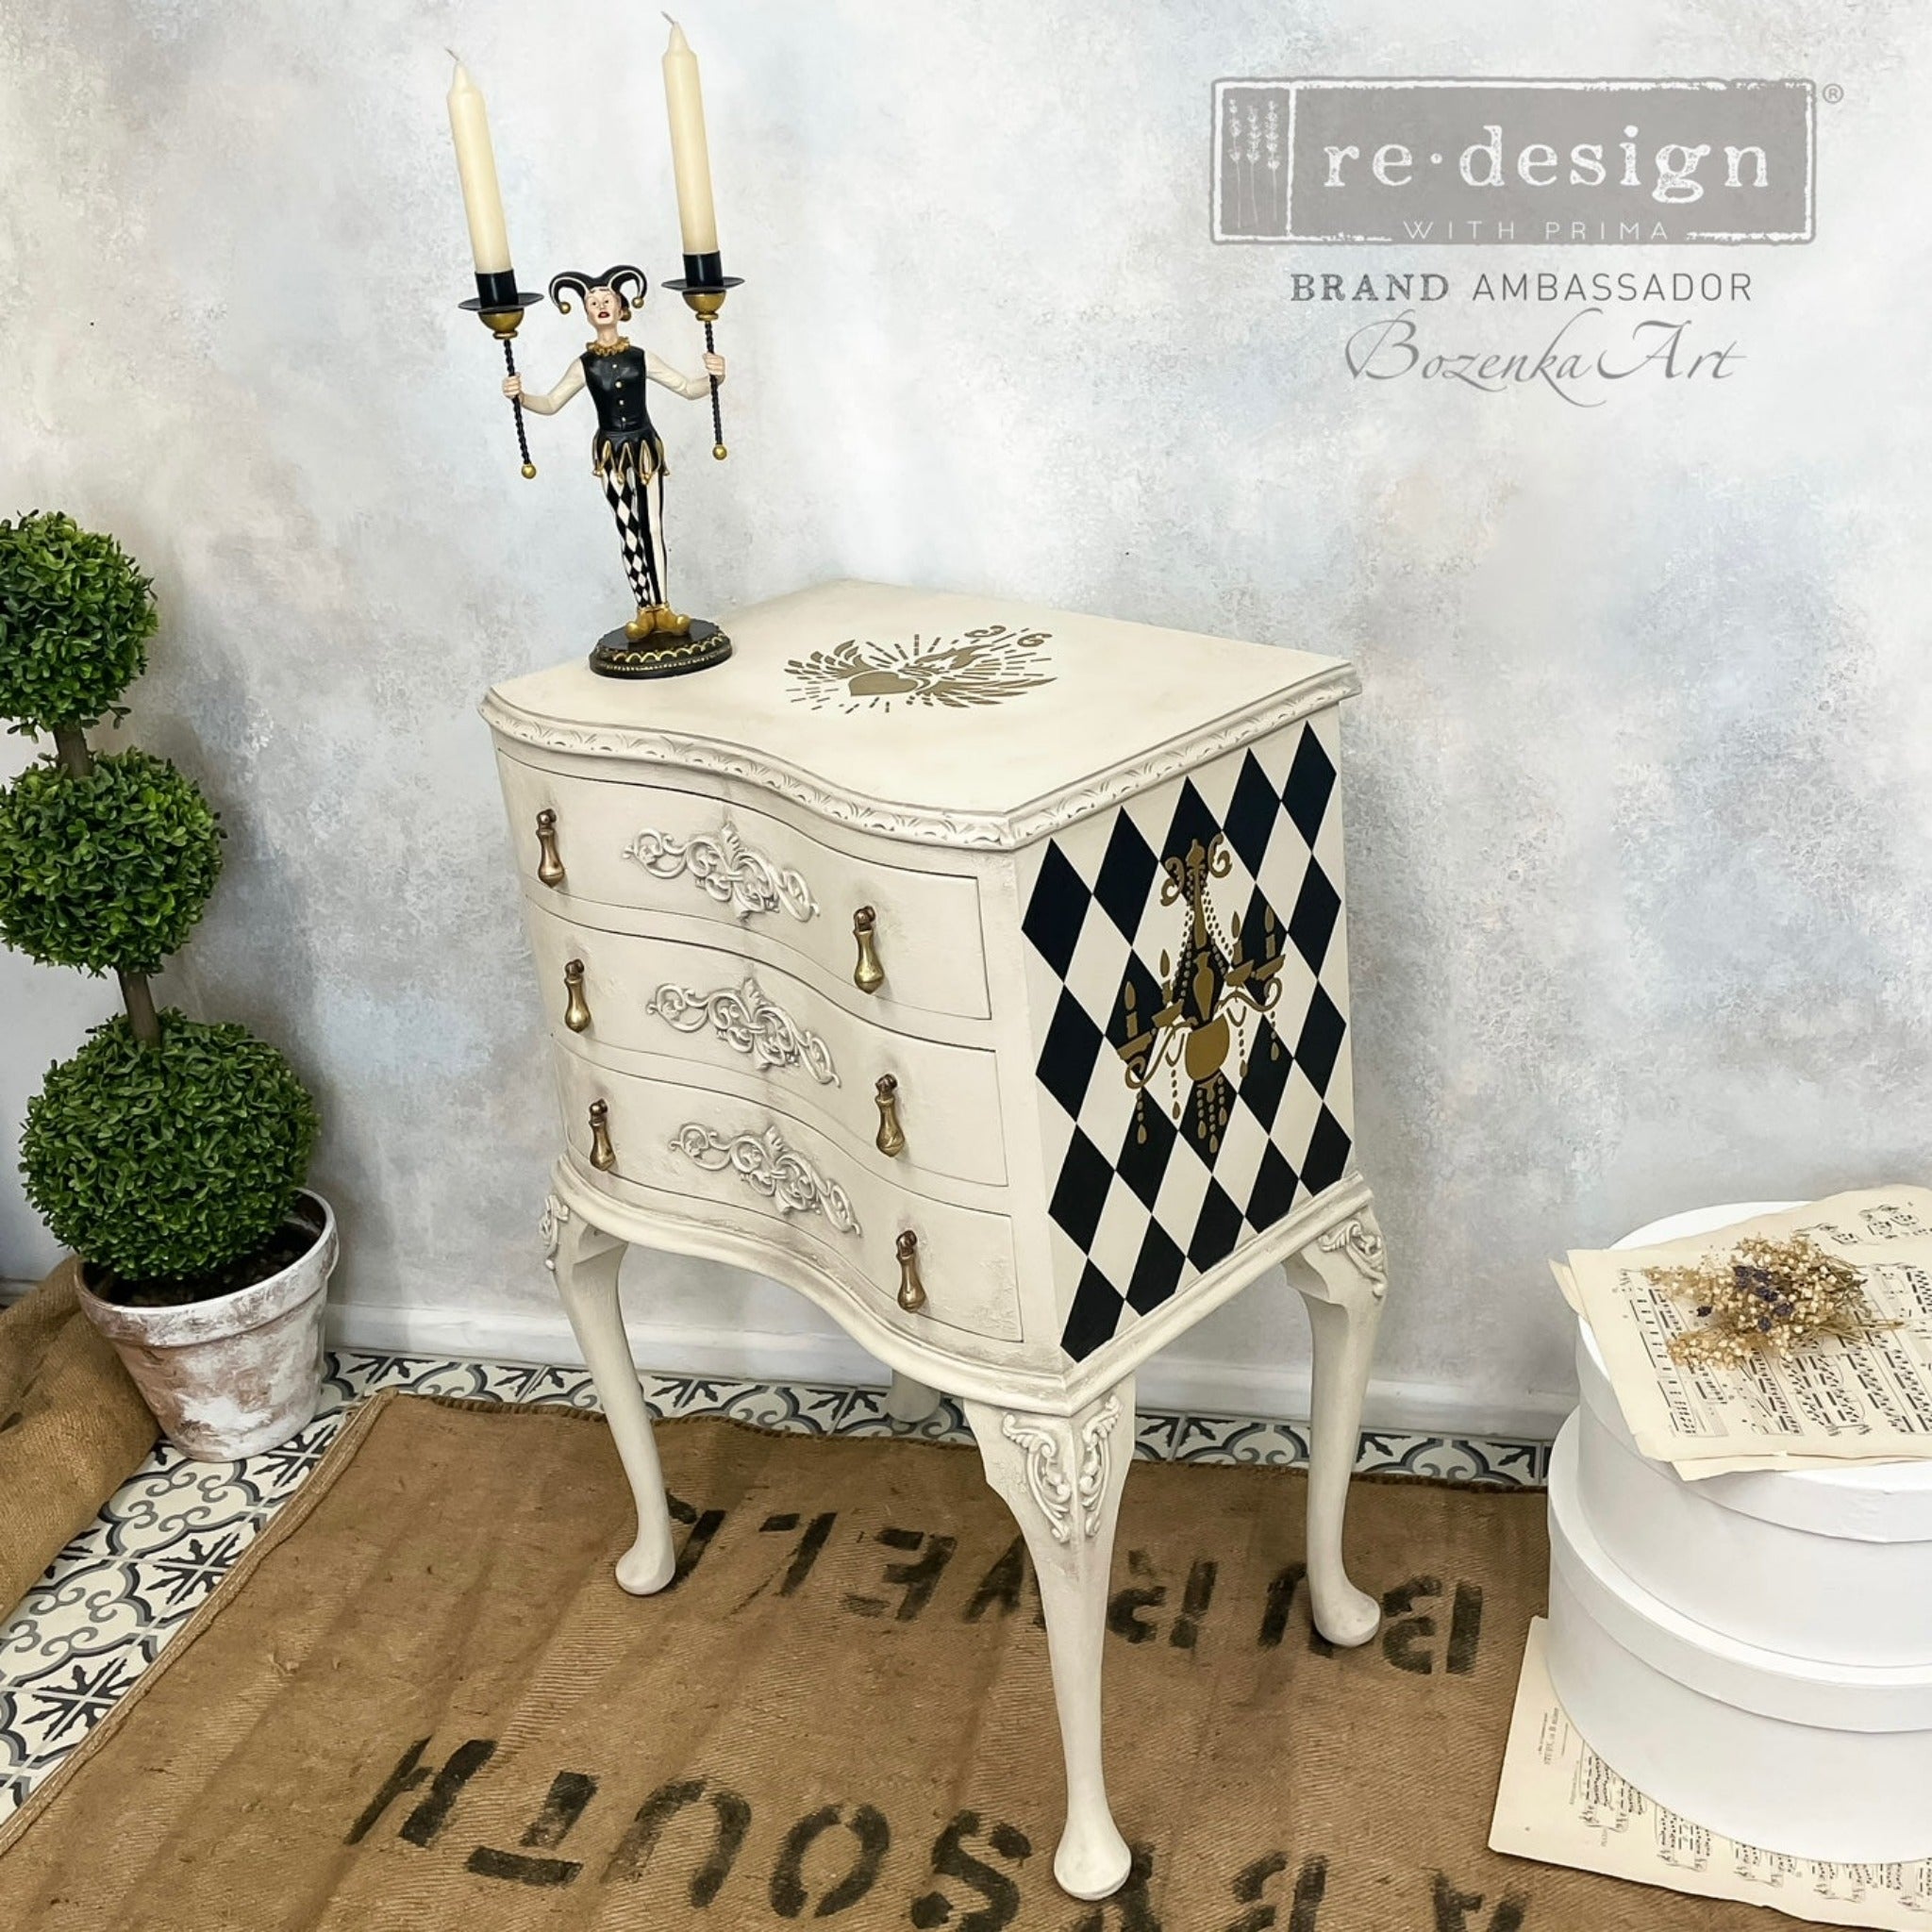 A vintage 3-drawer nightstand refurbished by Bozenka Art is painted off-white and features the Harlequin transfer on its sides.